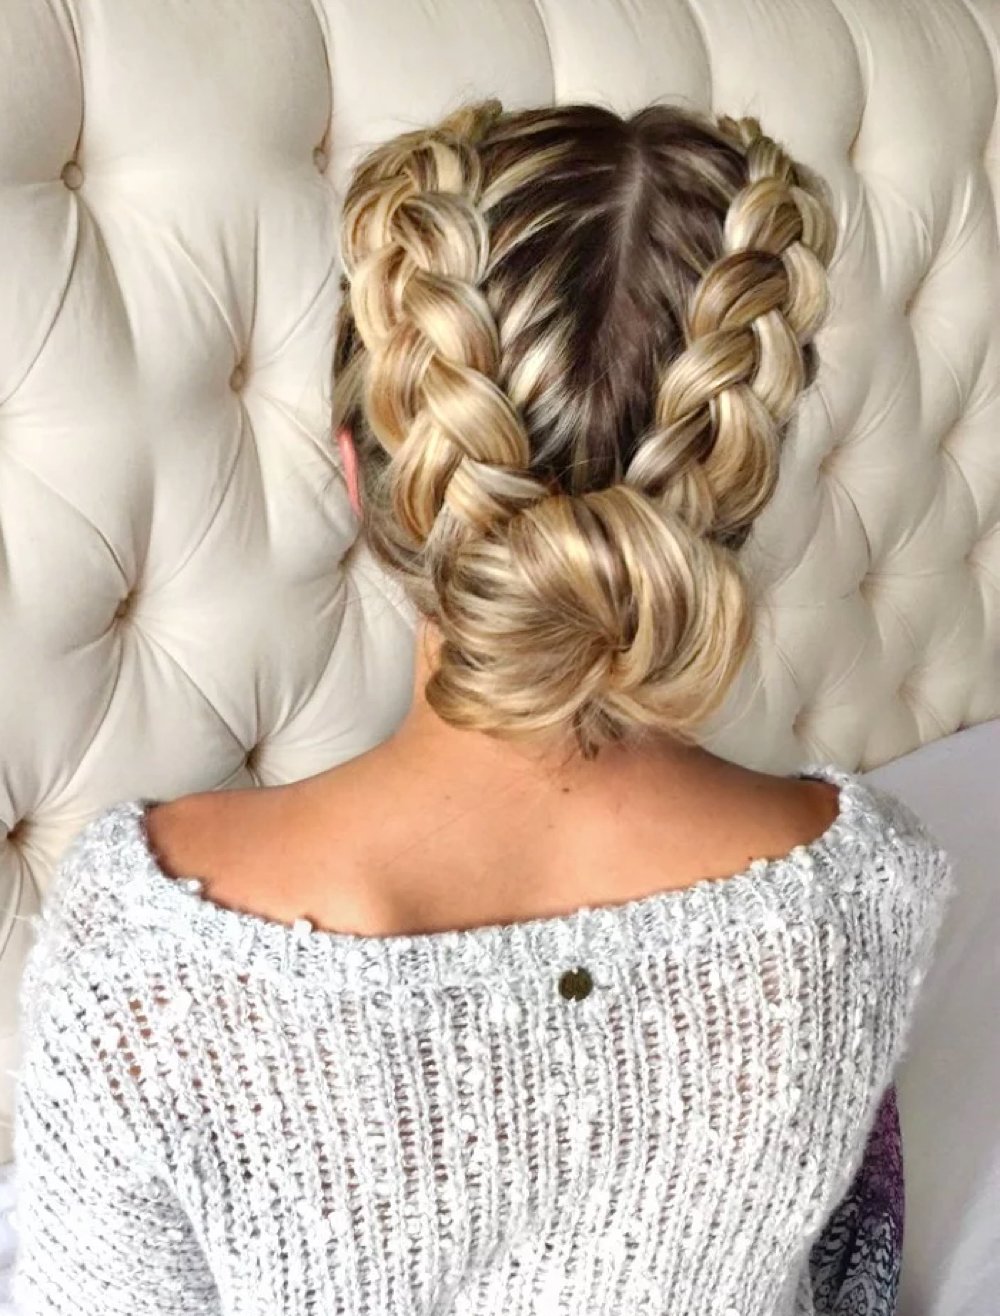 Trending Double Dutch braided updo